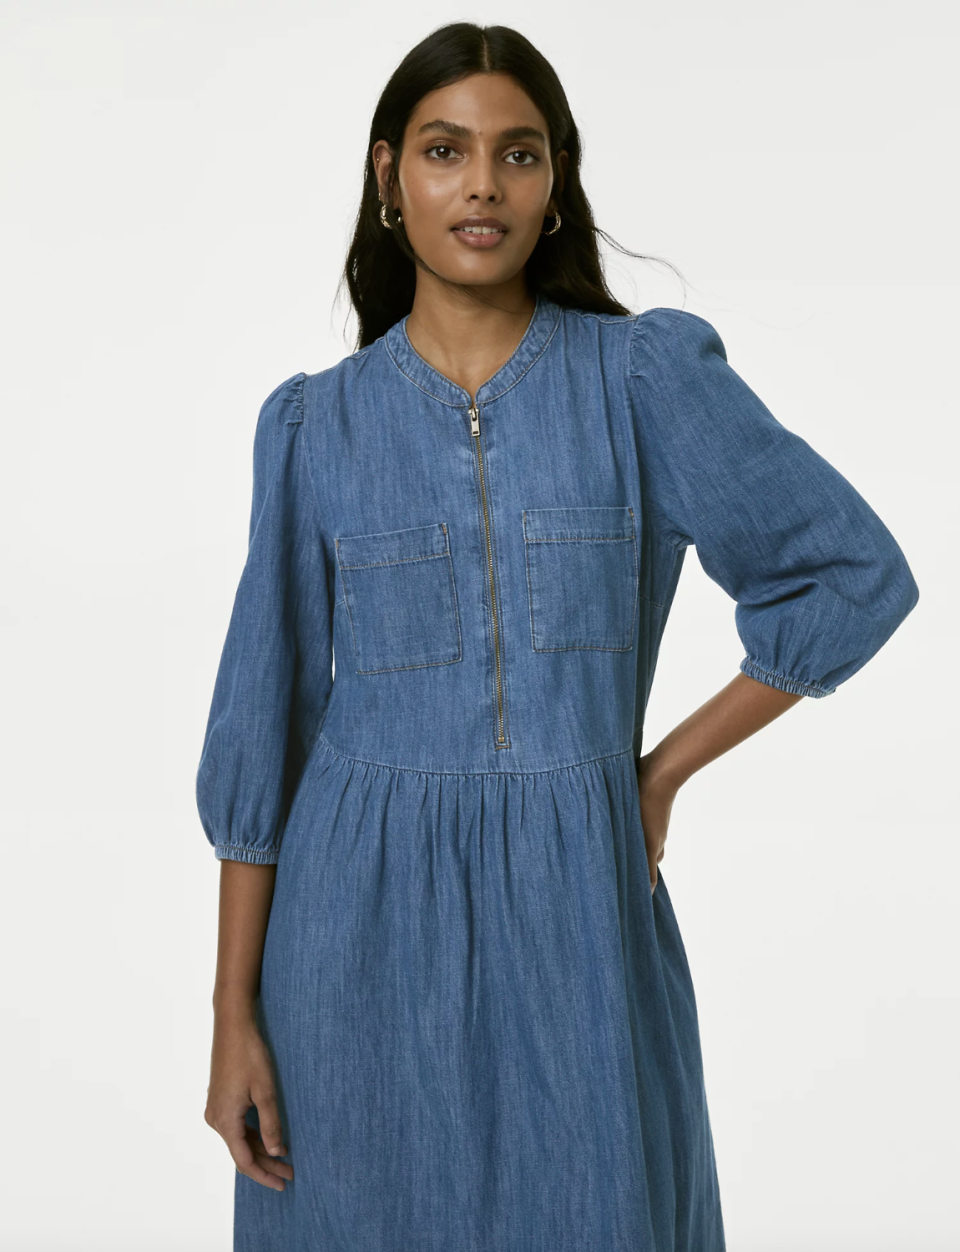 This denim midi dress is crafted from responsibly sourced cotton. (Marks & Spencer)